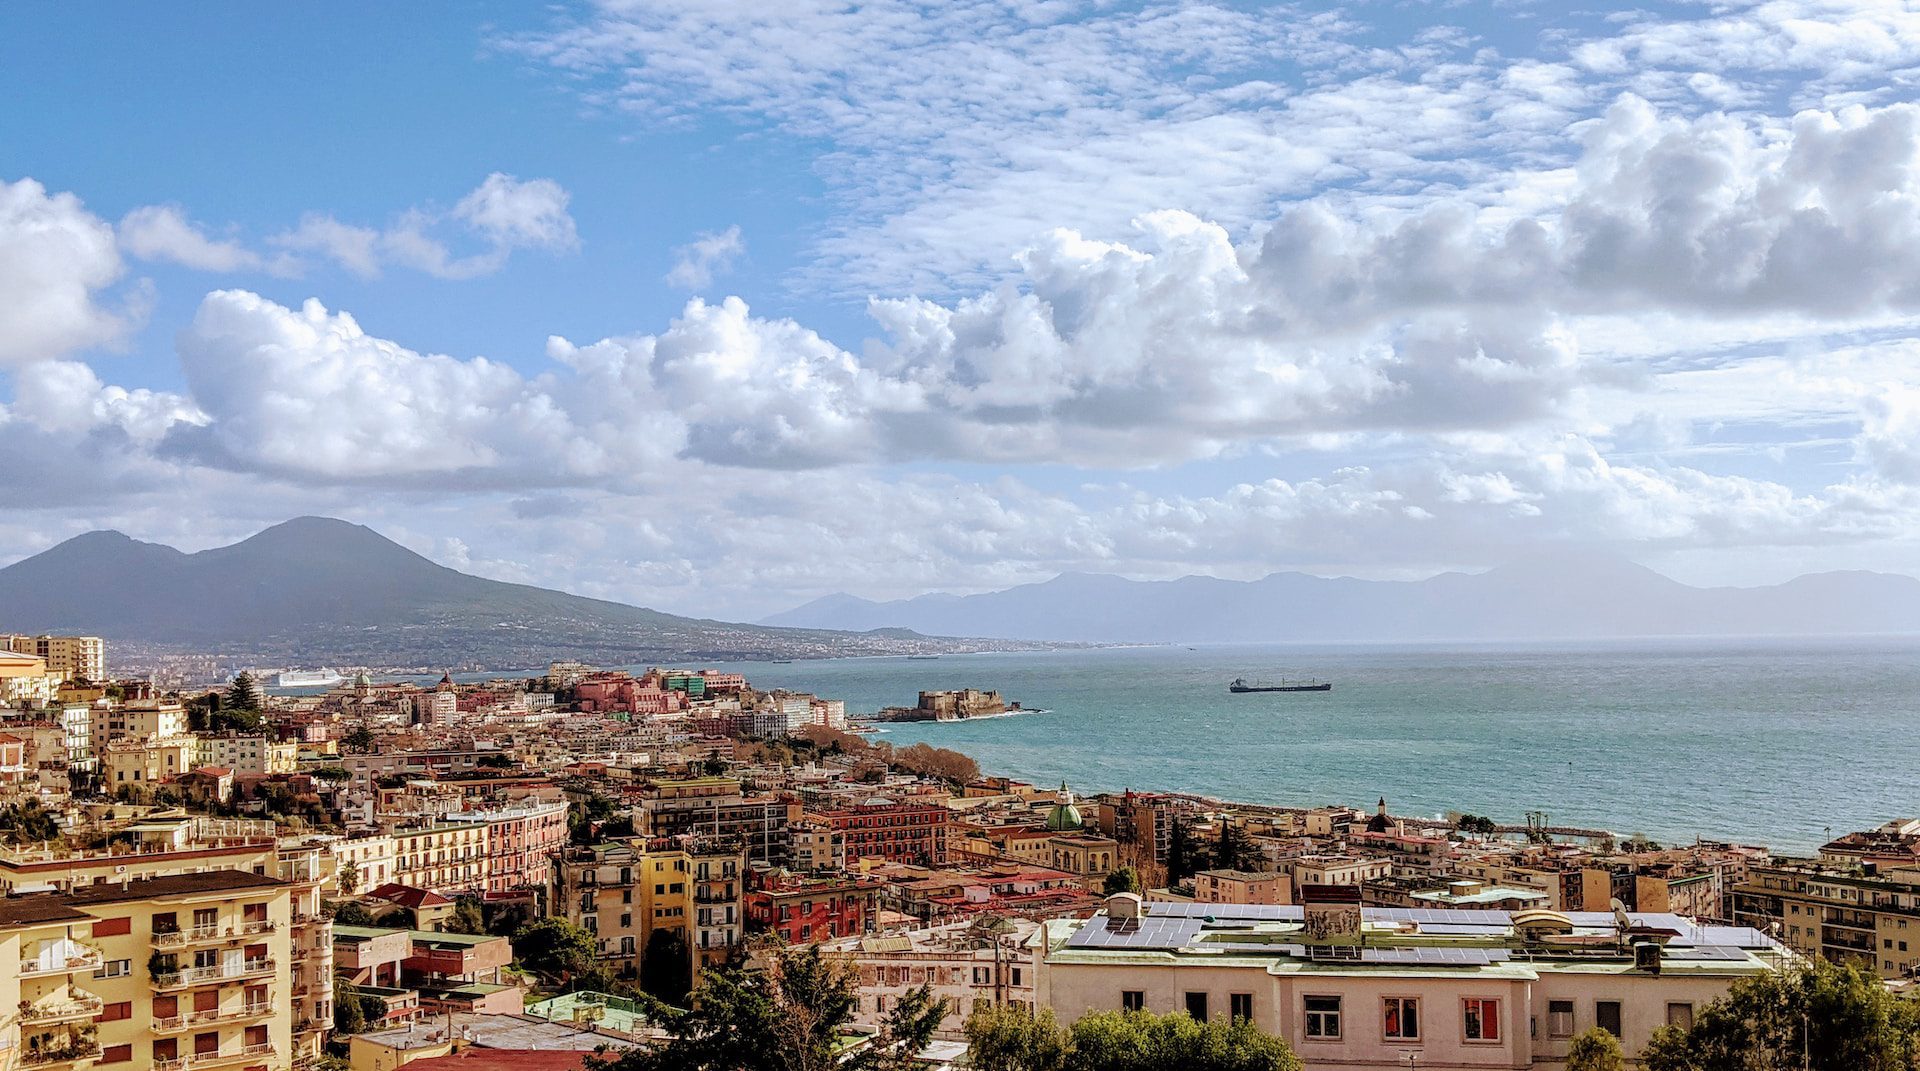 View of the city of Naples, with mountains in the background and the sea up ahead.